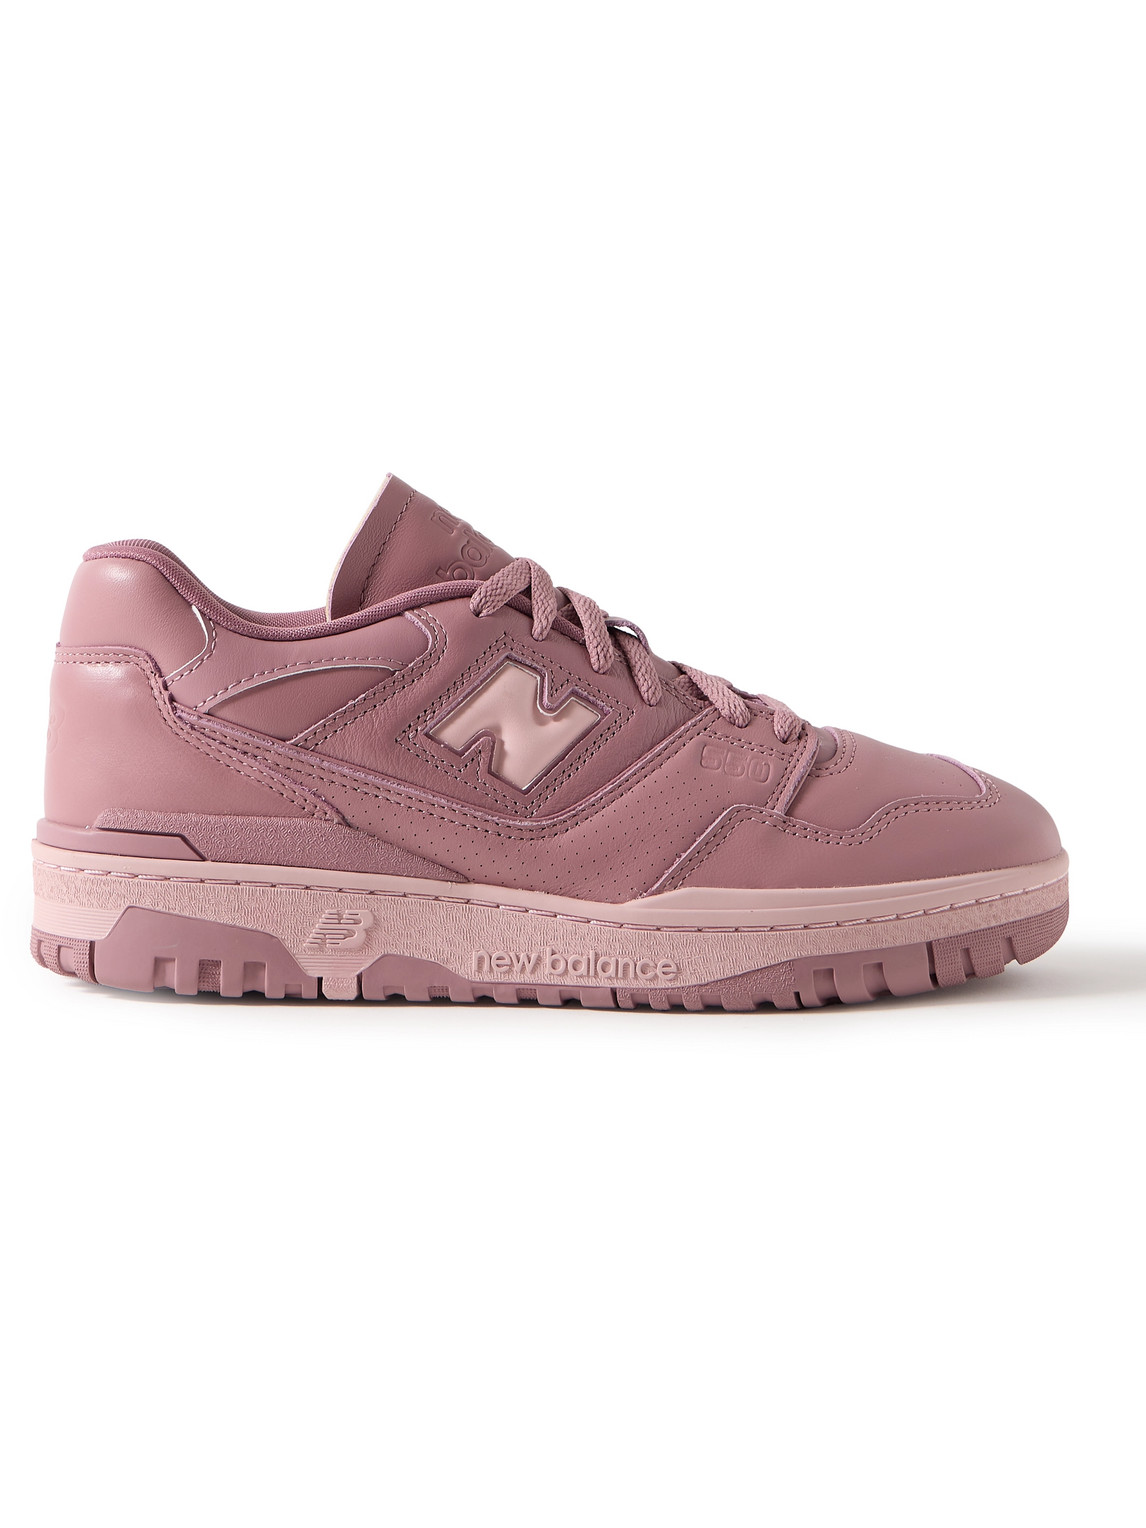 New Balance 550 Leather Sneakers In Pink